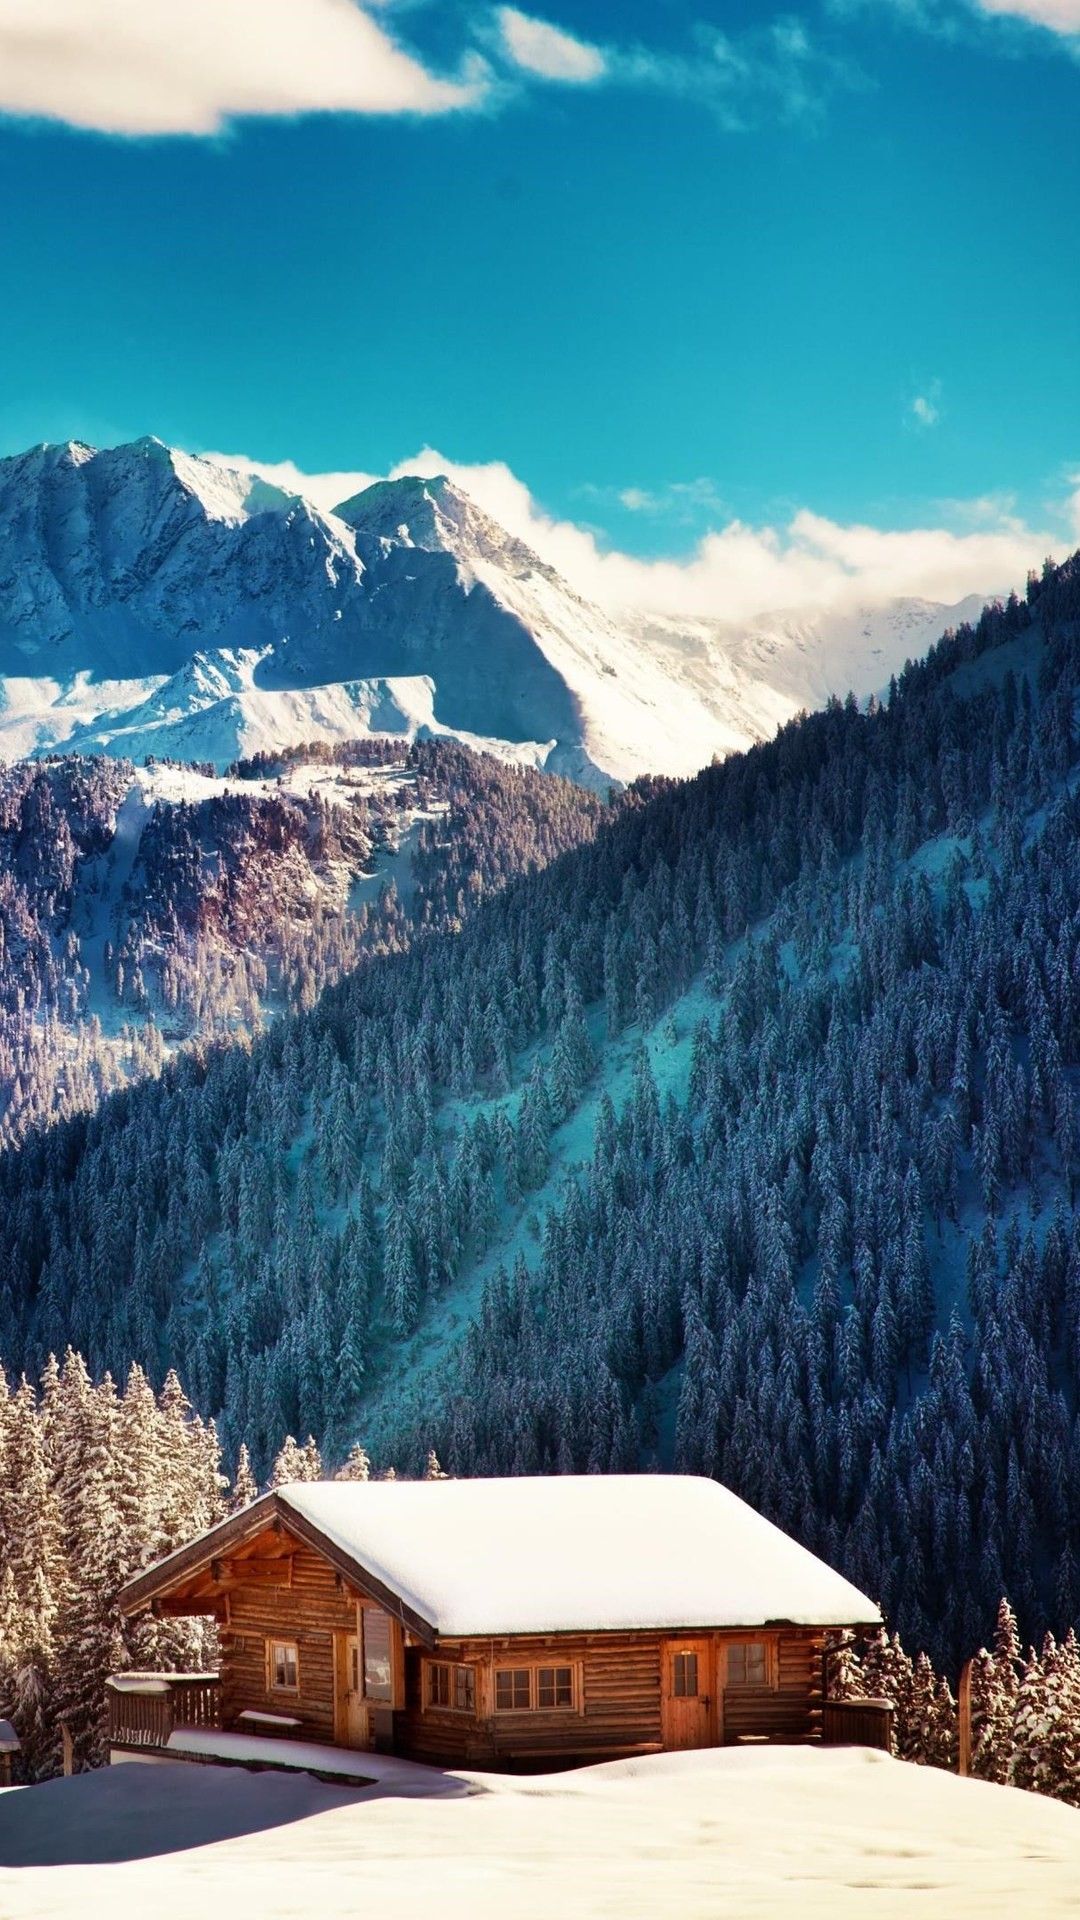 Wallpaper For Iphone Winter Mountain House